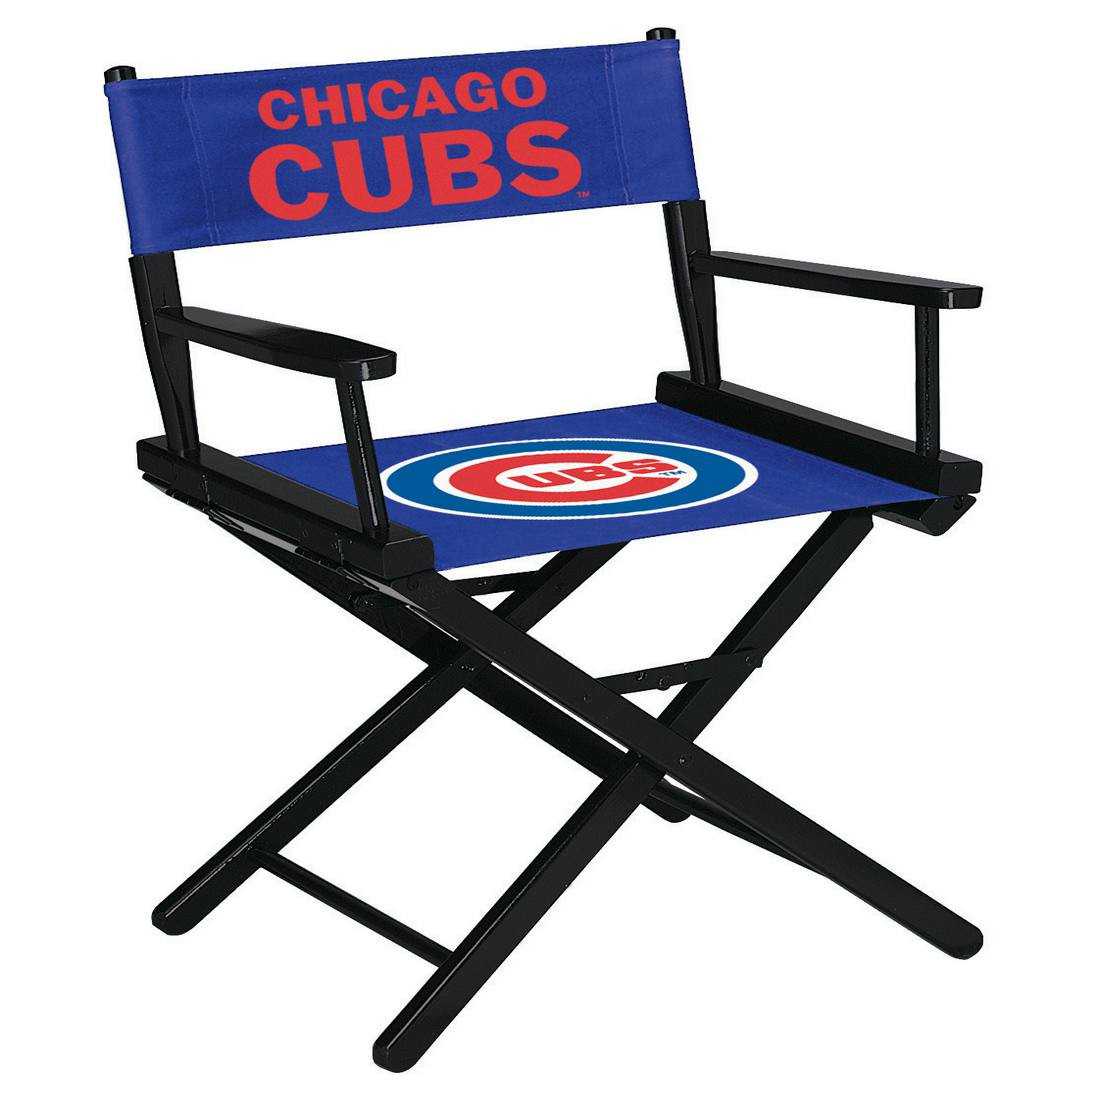 CHICAGO CUBS TABLE HEIGHT DIRECTORS CHAIR